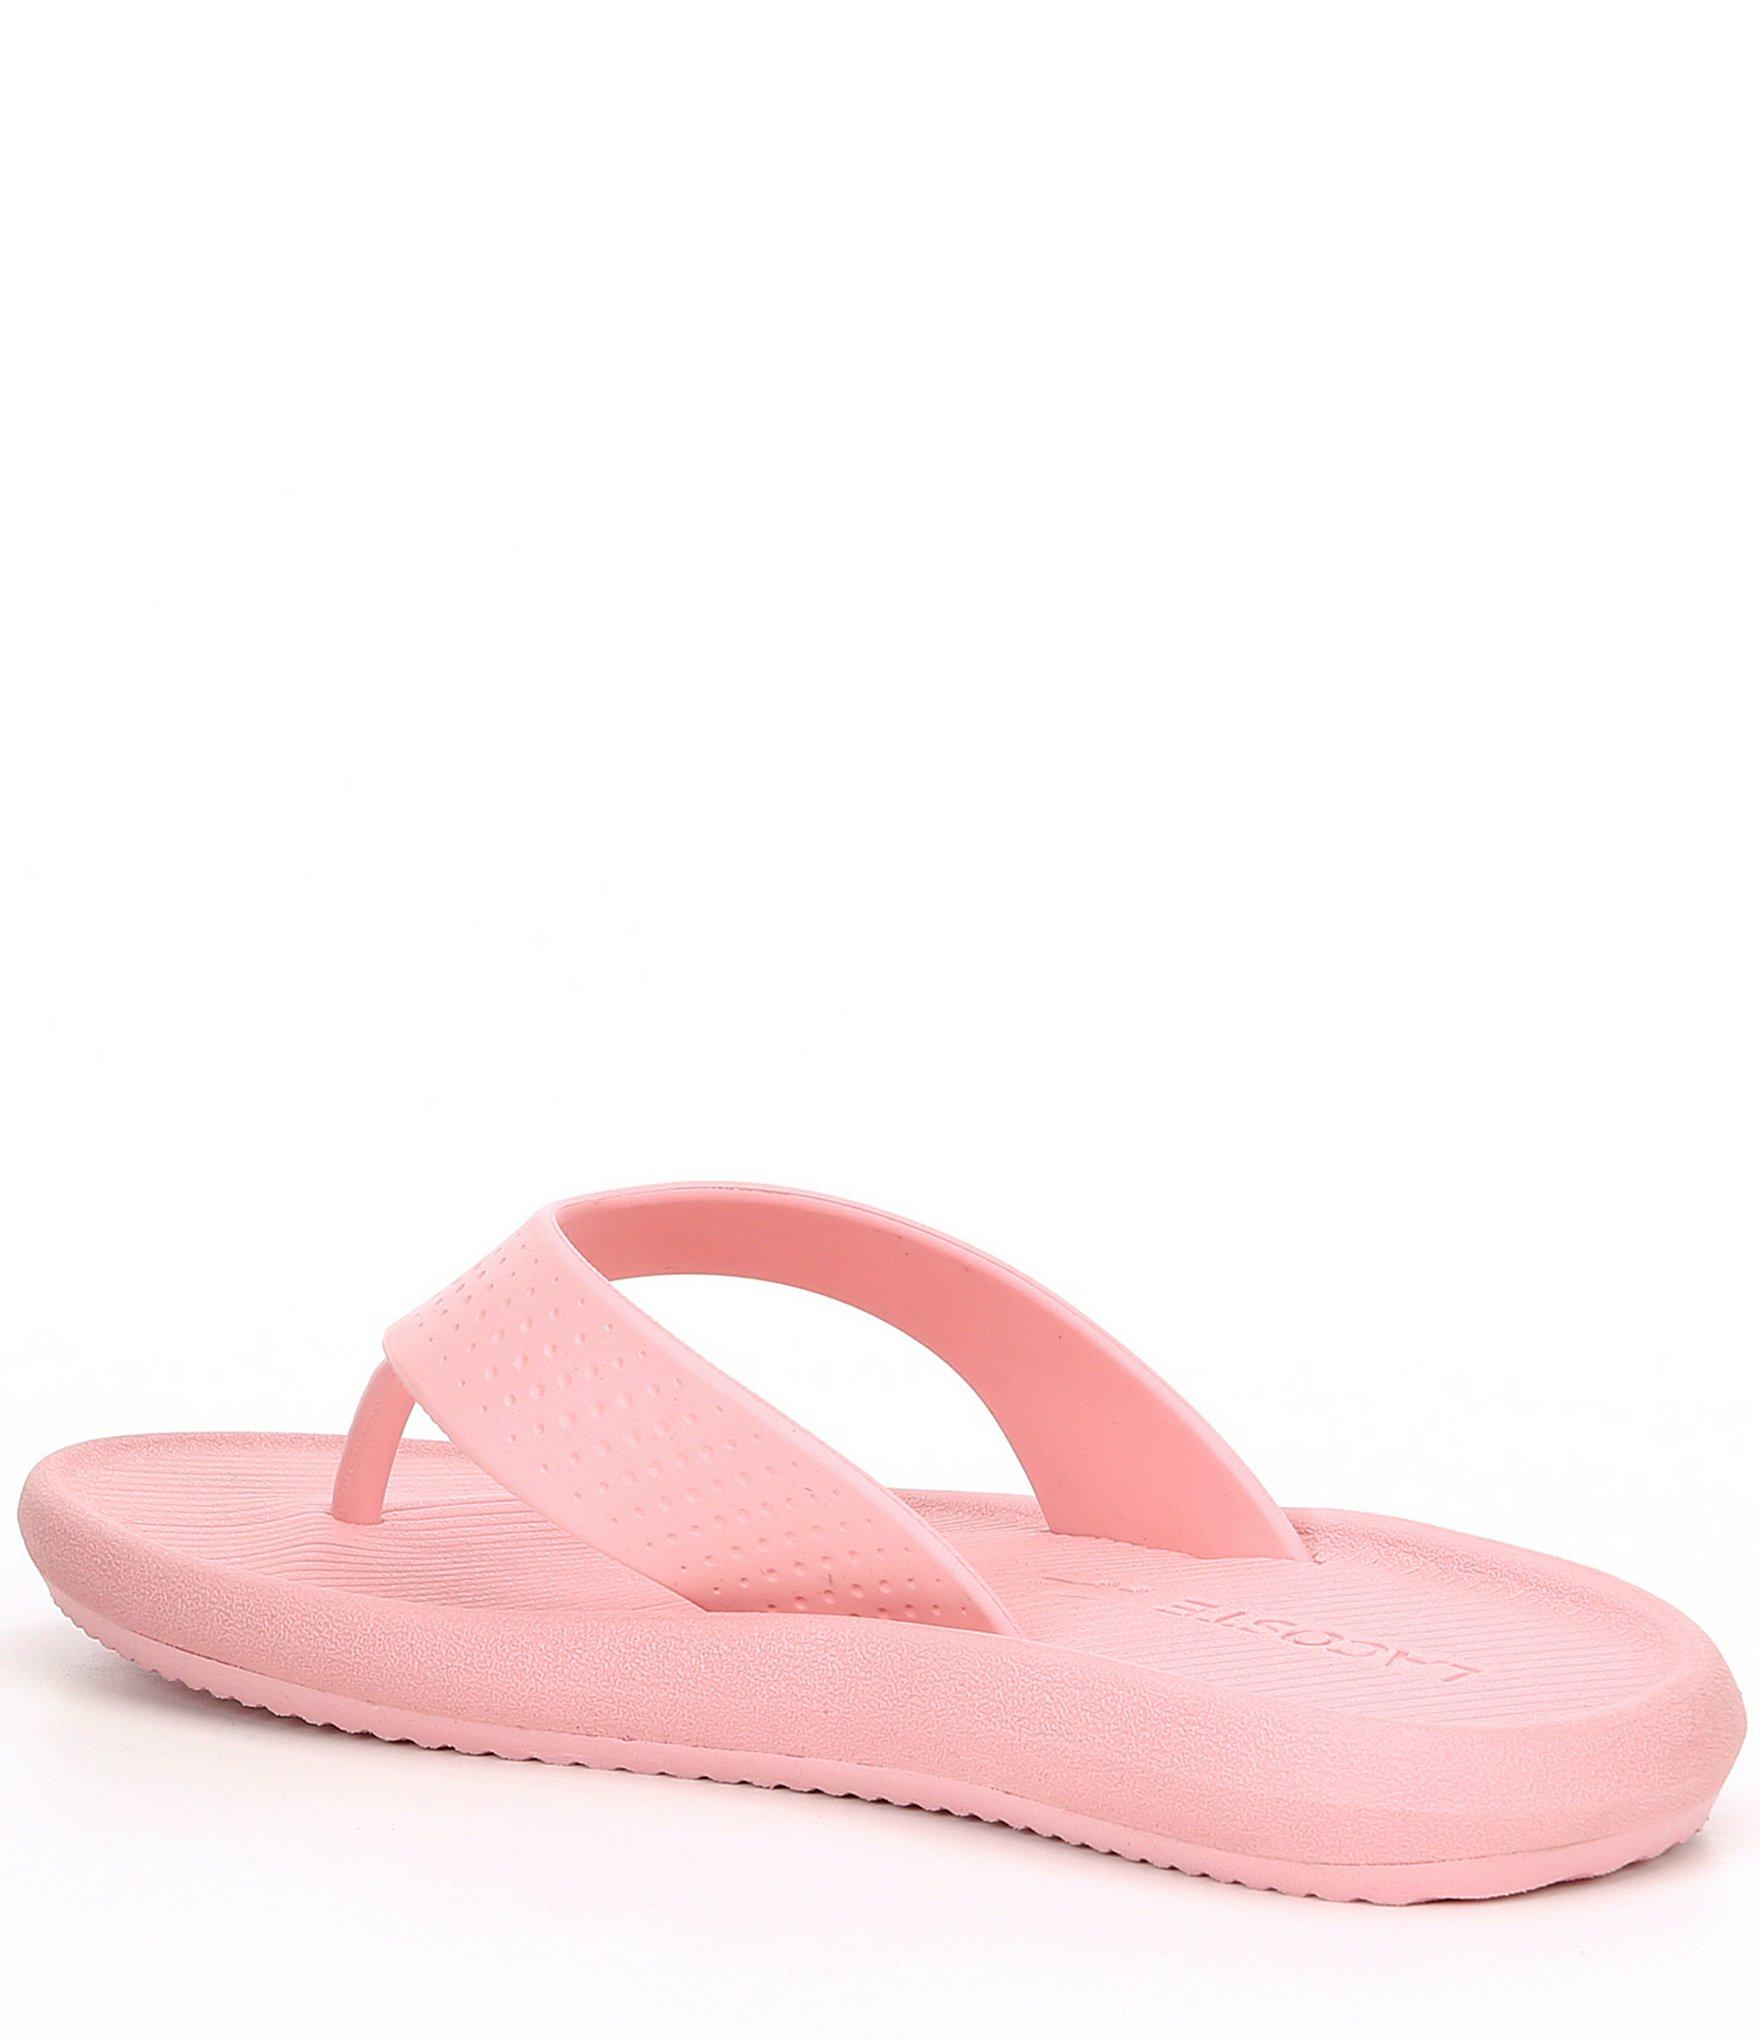 Lacoste Women's Croco 2191 Thong Sandals in Pink - Lyst